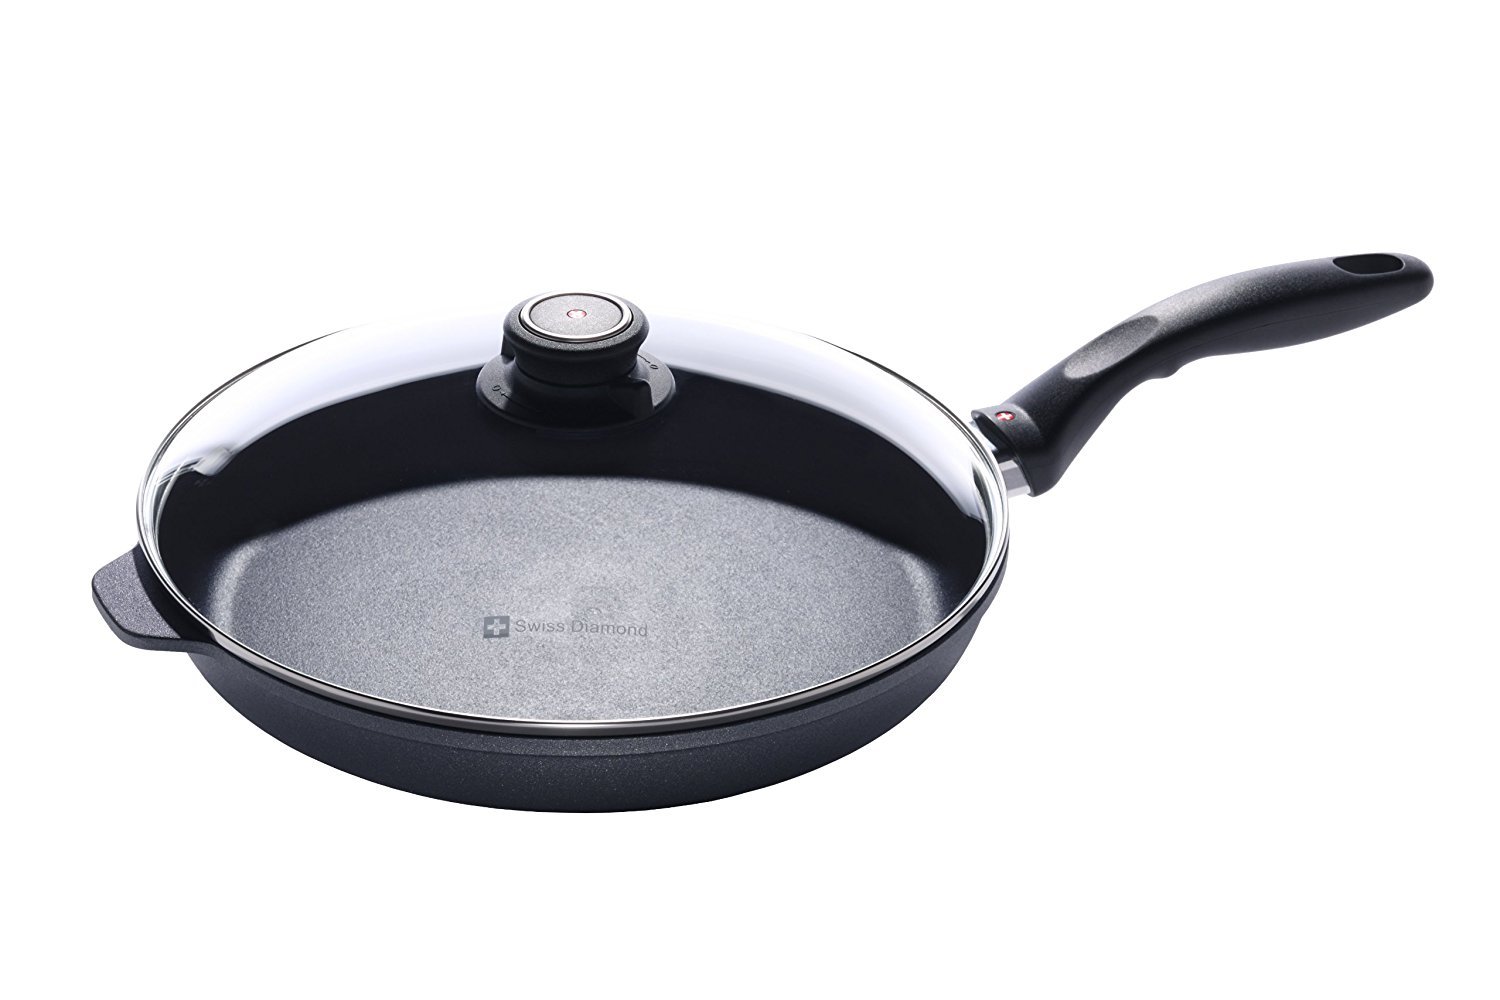 Swiss Diamond 11" Nonstick Induction Fry Pan with Lid, Dishwasher and Oven Safe Fry Pan, Gray